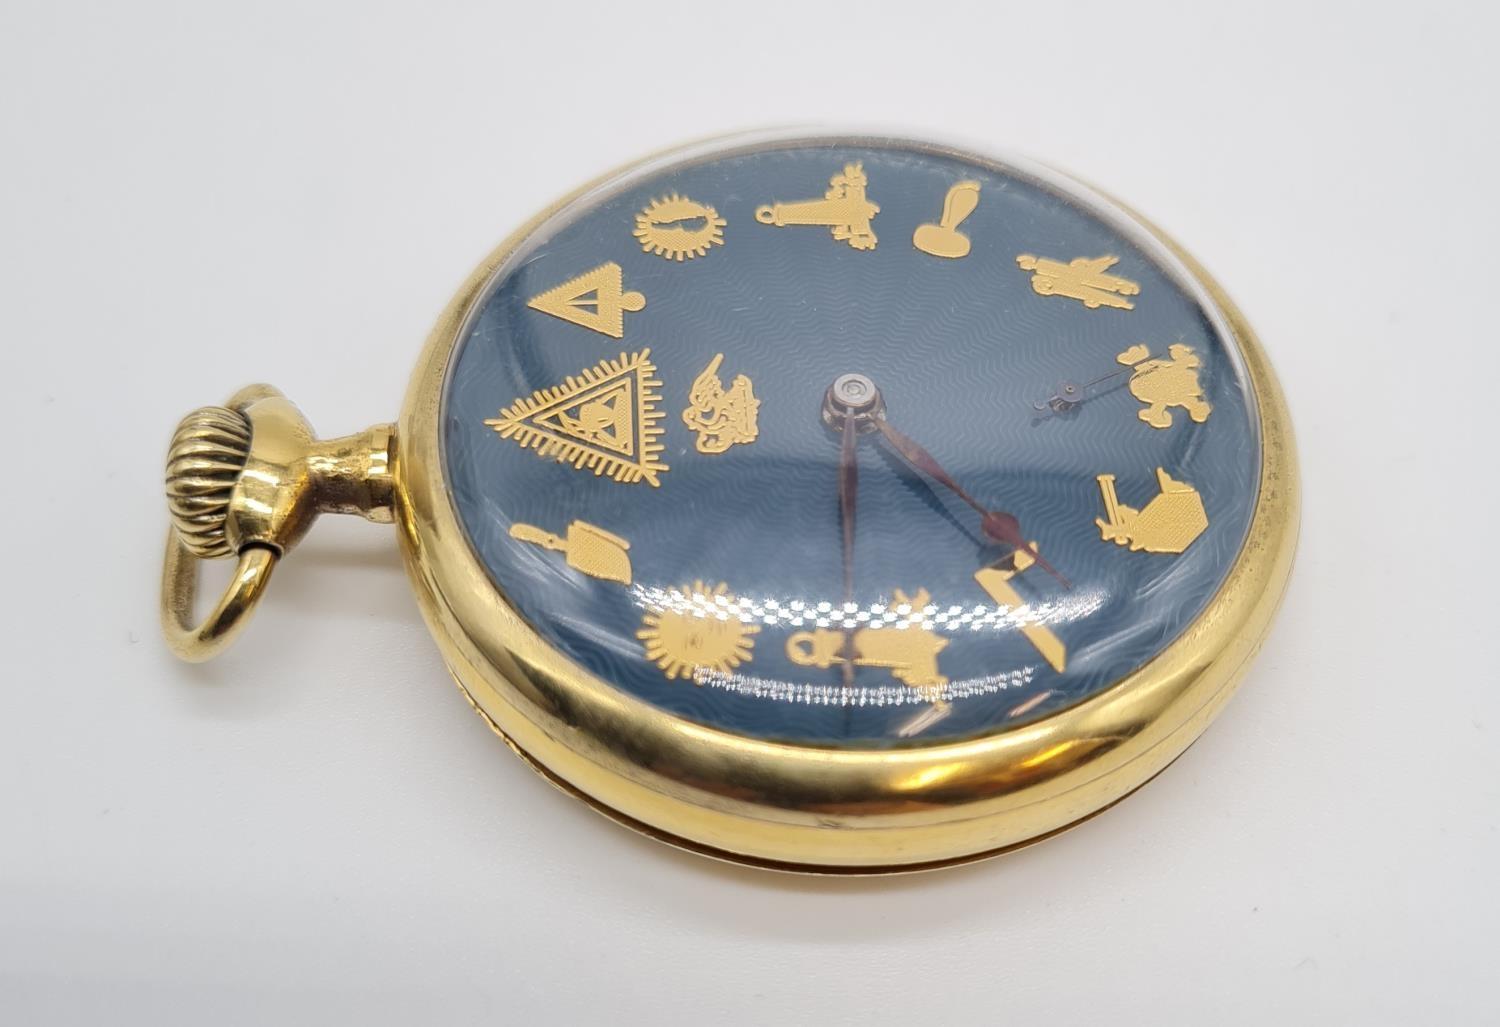 Omega Masonic Pocket Watch with rare Blue face, full working order - Image 5 of 7